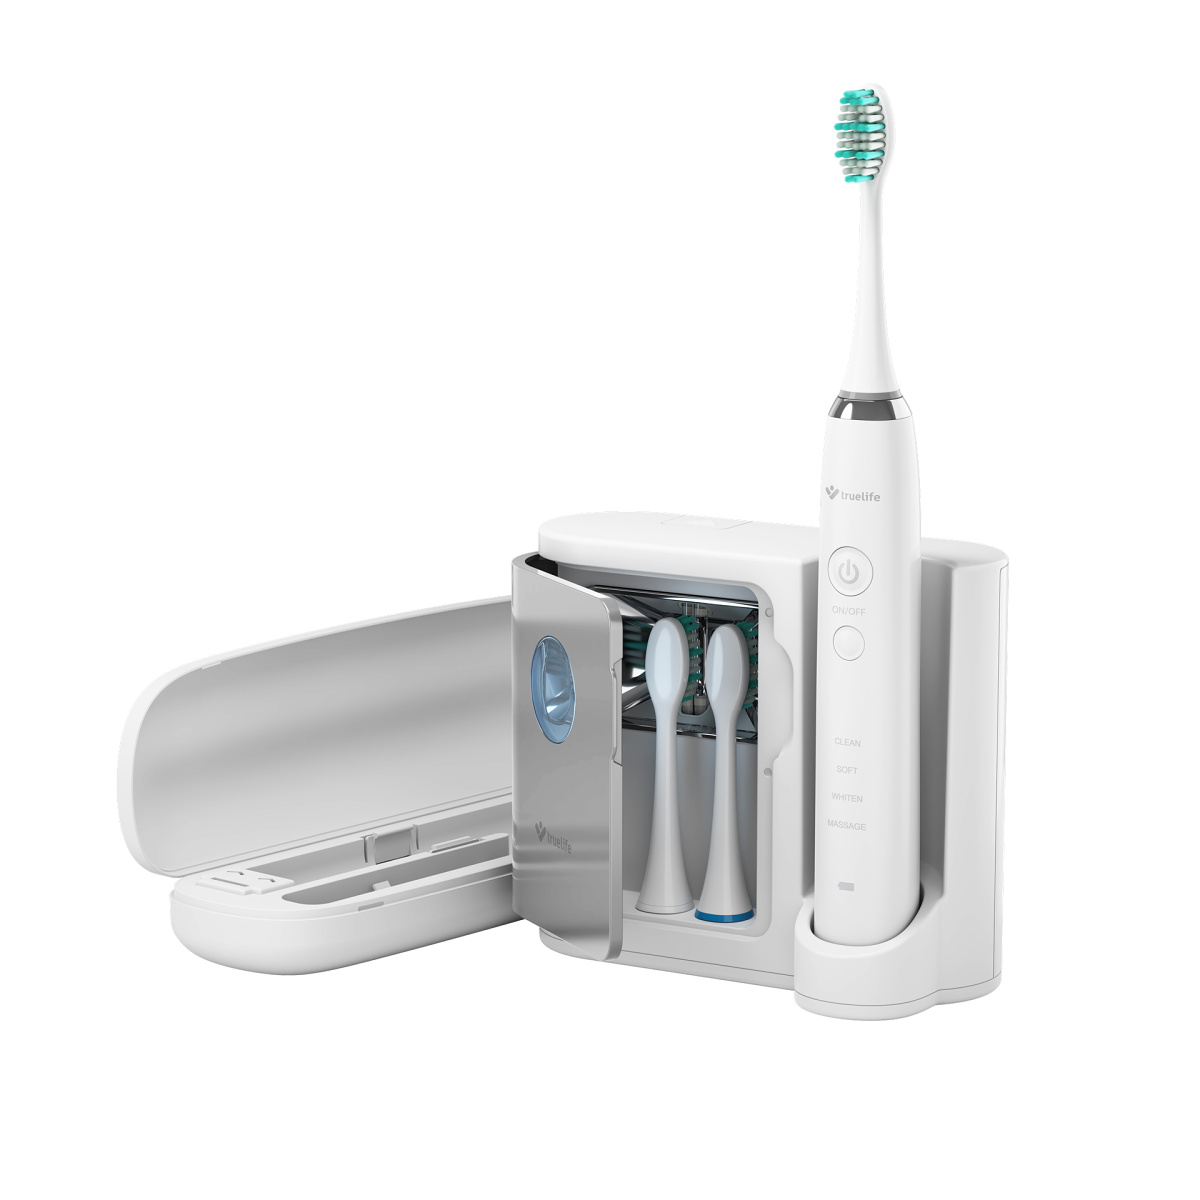 SonicBrush UV – Don’t give tooth decay a chance